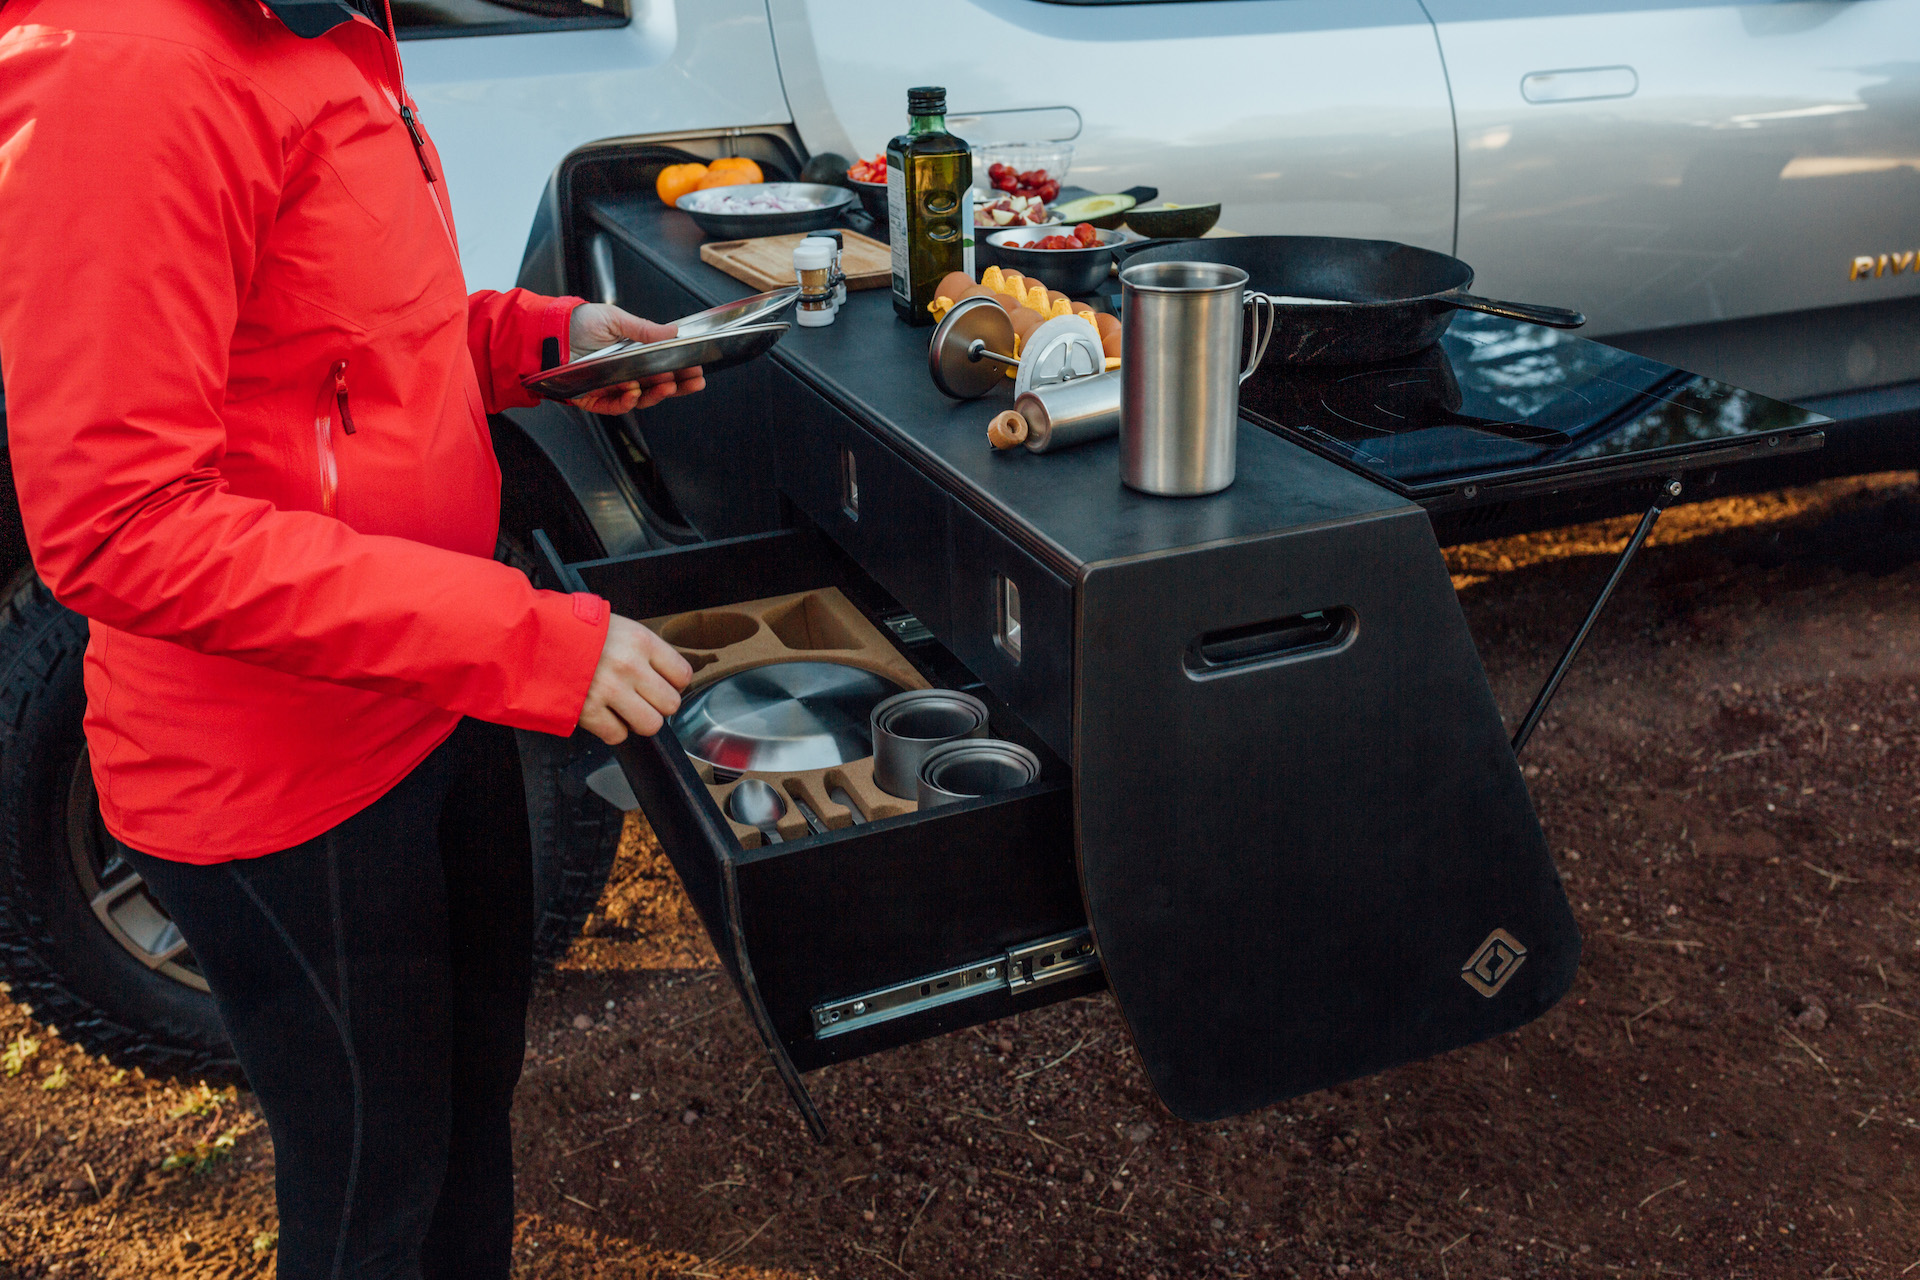 Pullout kitchen confirmed as an option on Rivian R1T electric pickup